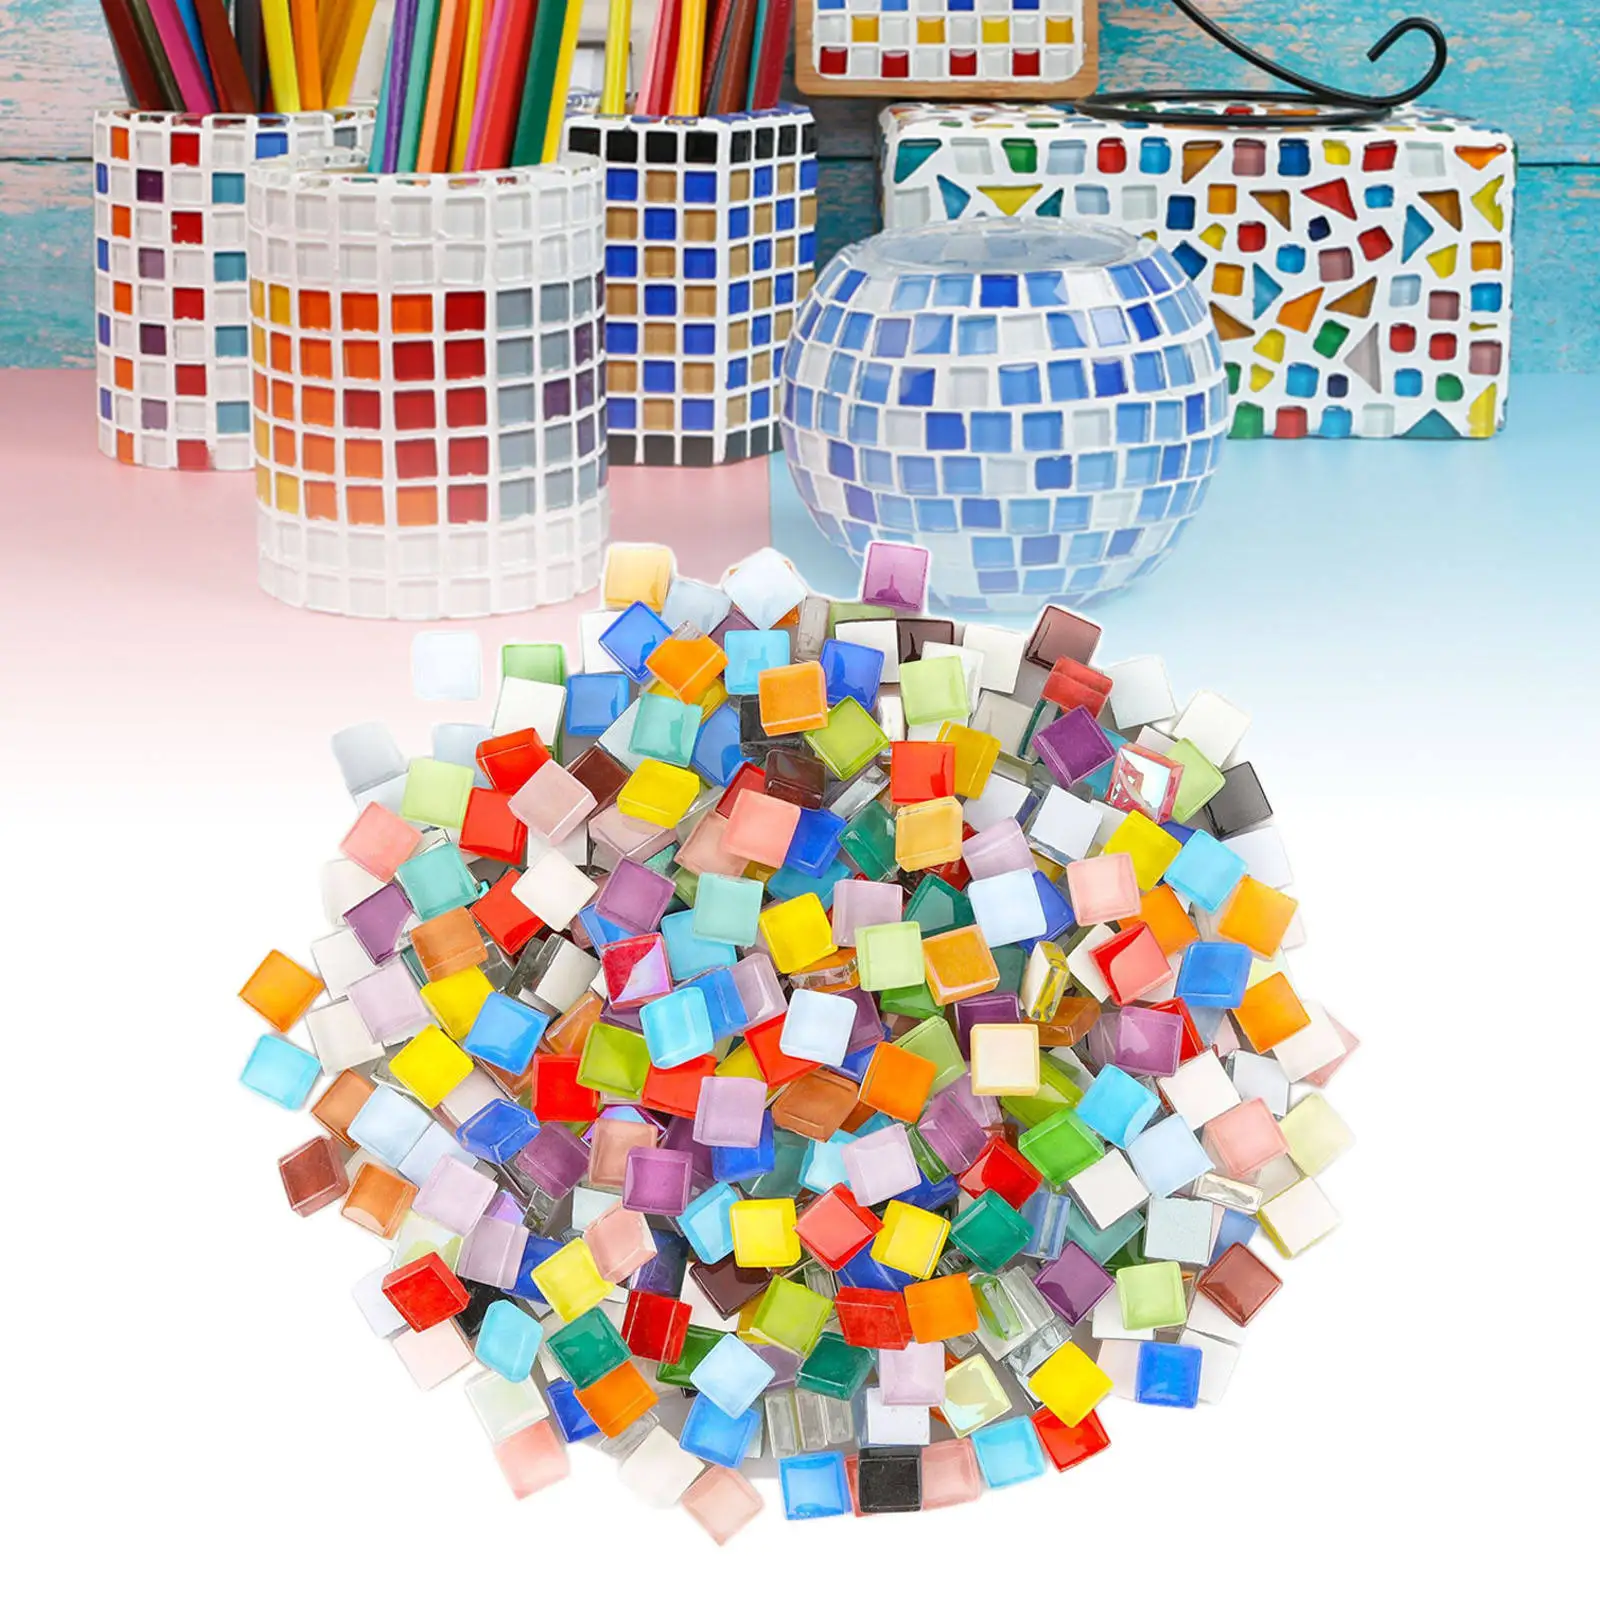 Mini Glass Mosaic Tiles Glitter Mixed Colors Glass Sticker DIY Material for DIY Crafts Hobbies Picture Frames Plates Flowerpots